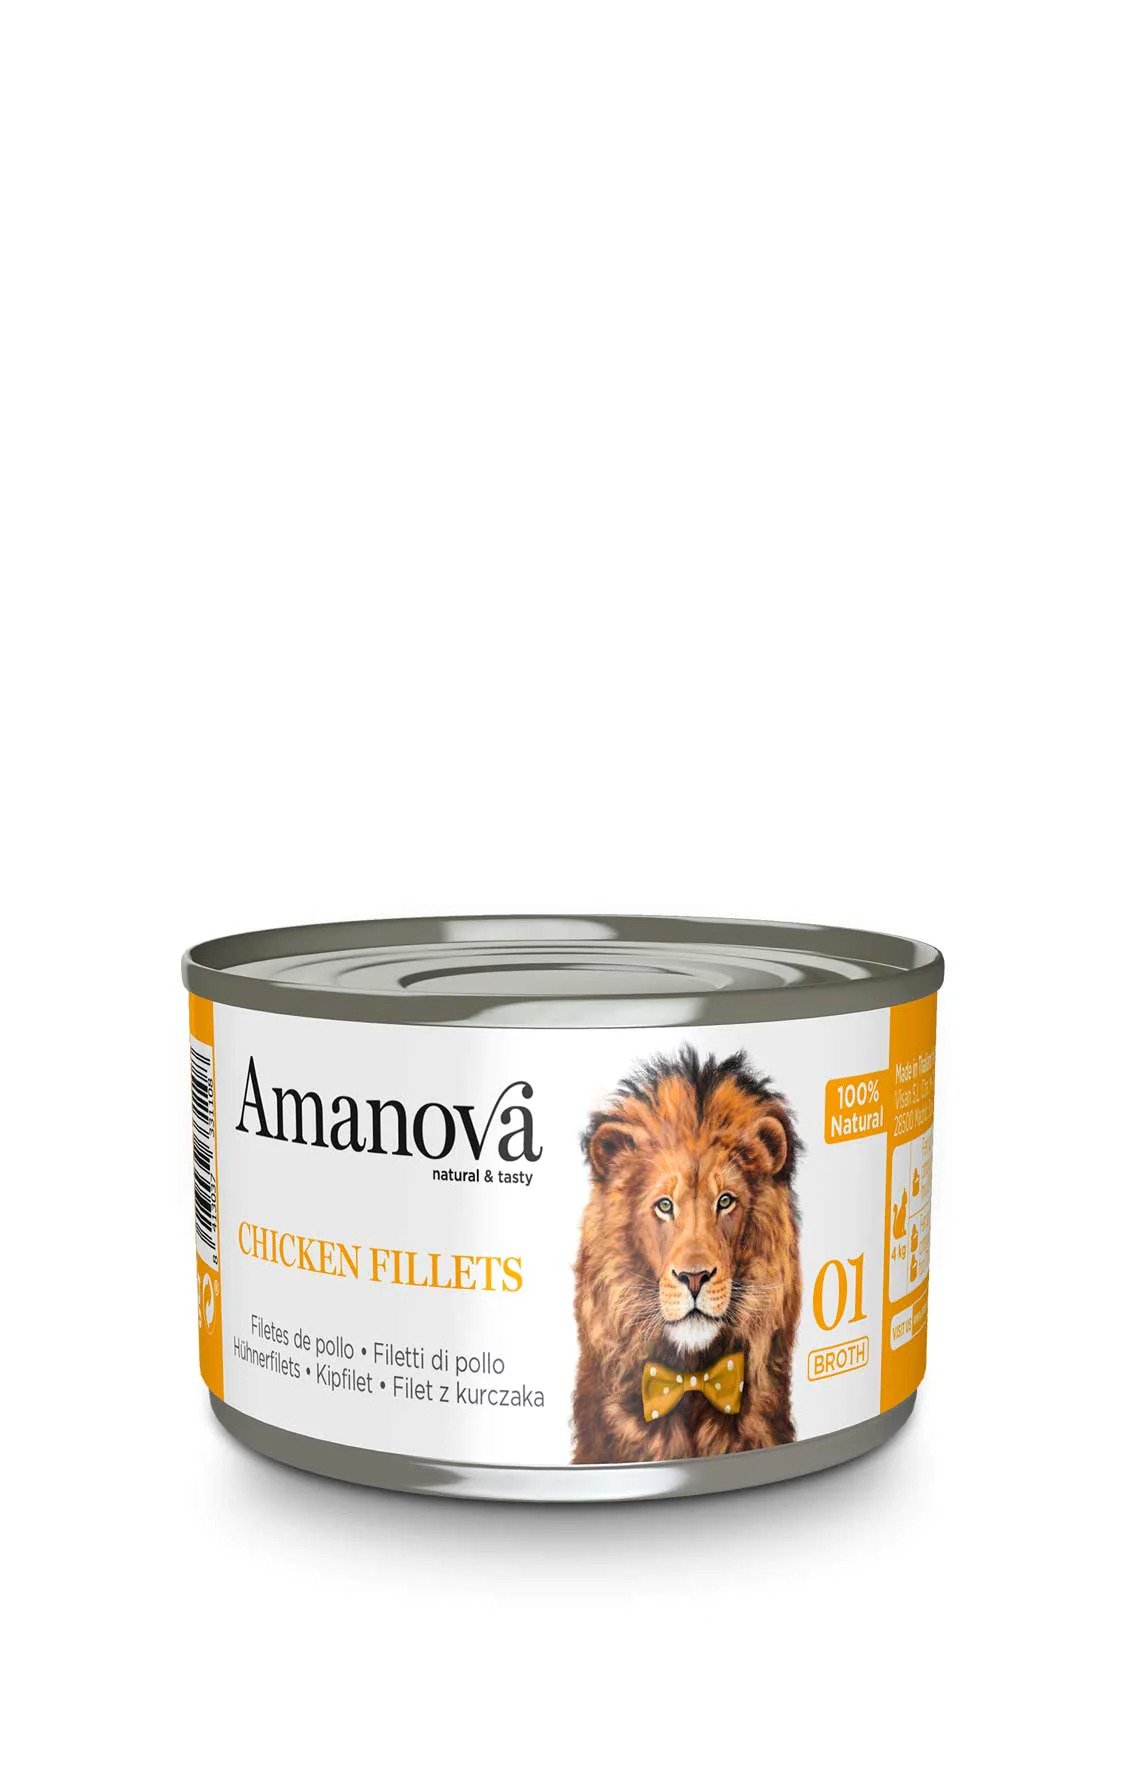 Amanova Canned Cat Chicken Fillets Broth - 70g